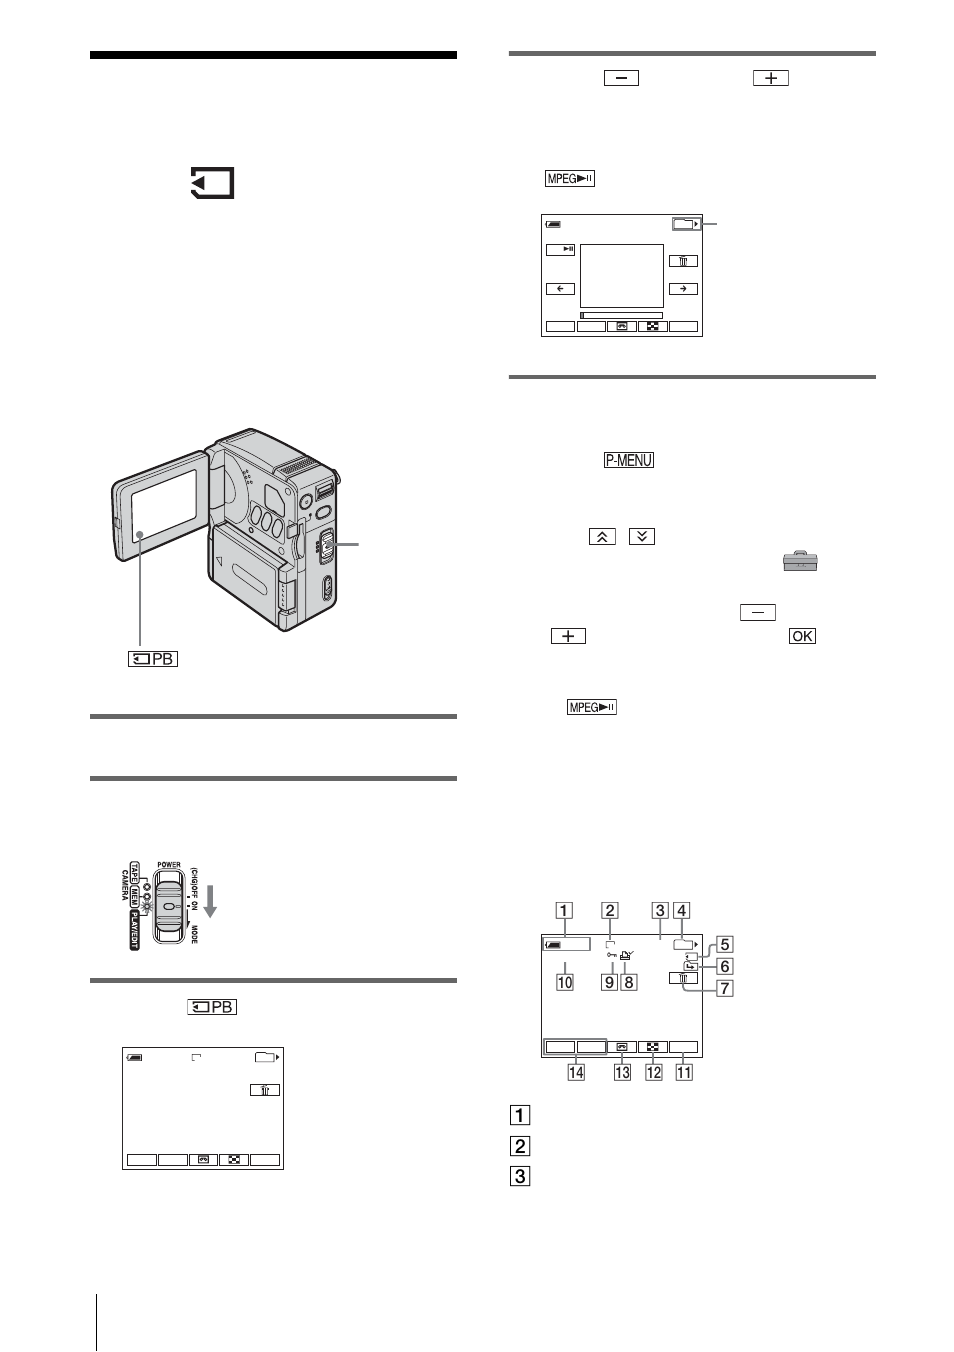 Viewing recordings on a “memory stick duo, Open the lcd panel, Touch | Touch (previous)/ (next) to select a picture | Sony DCR-IP1 User Manual | Page 40 / 116